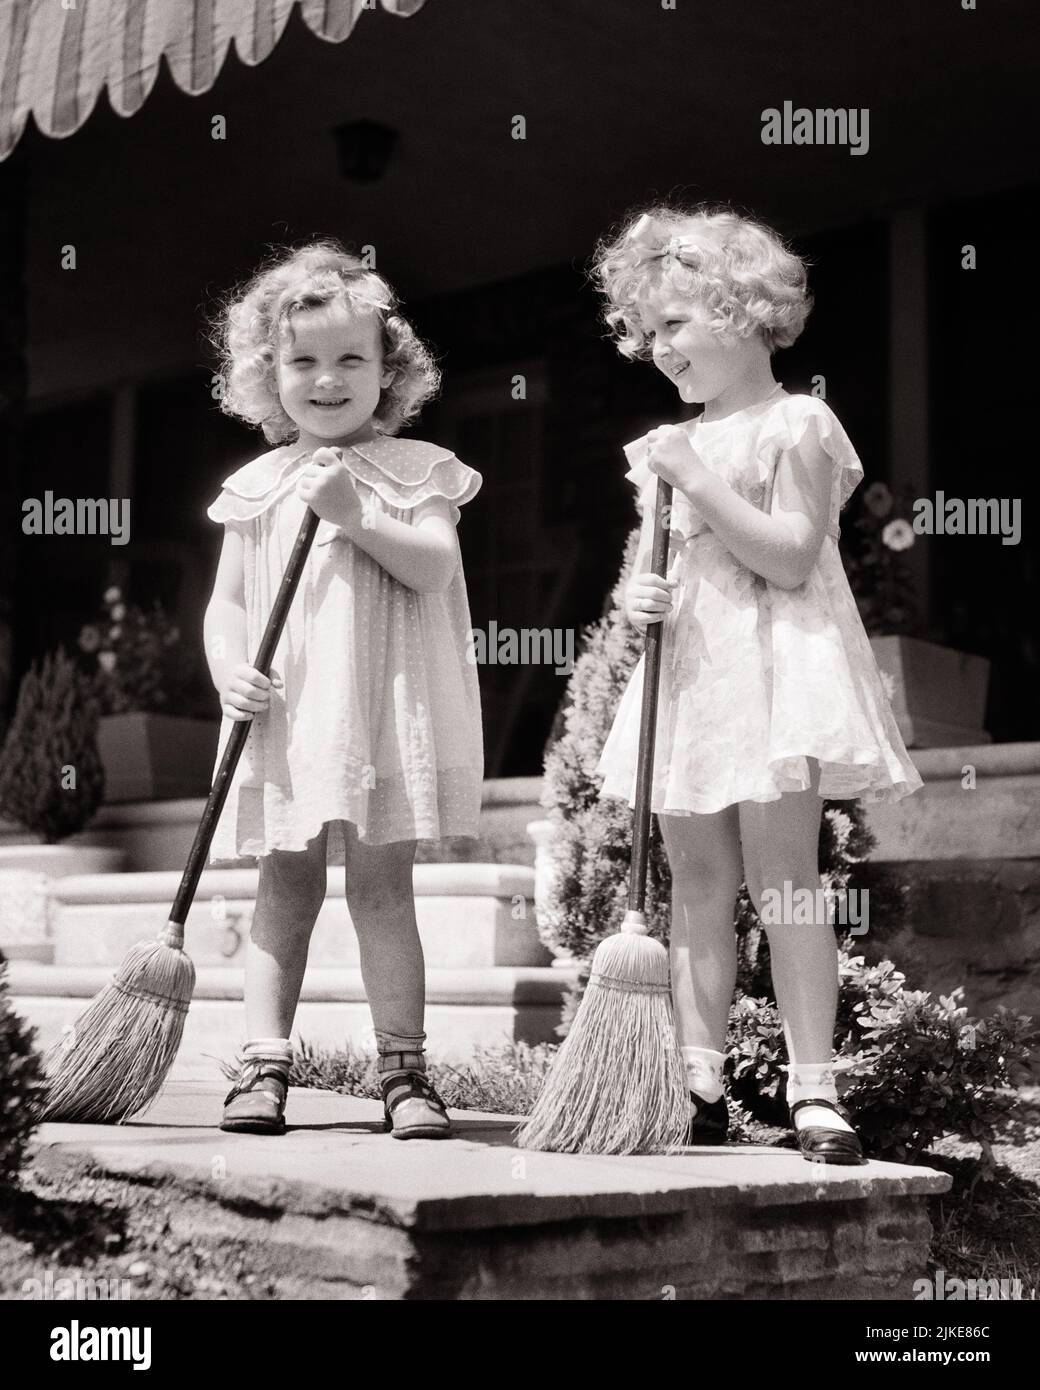 1930s TWO SMILING CURLY HAIRED GIRLS IN CUTE SUMMER DRESSES HOLDING BROOMS SWEEPING THE SIDEWALK IN FRONT OF THE HOUSE PORCH - j5366 HAR001 HARS FRIEND TEAMWORK TWIN IDENTICAL DOUBLE PLEASED JOY LIFESTYLE SATISFACTION FEMALES HOUSES HEALTHINESS HOME LIFE COPY SPACE FRIENDSHIP FULL-LENGTH BROOM RESIDENTIAL MATCH BUILDINGS SIBLINGS SISTERS B&W SUMMERTIME EYE CONTACT DRESSES GOALS MATCHING SAME HAPPINESS CHEERFUL SWEEPING LOW ANGLE CURLY MARY JANE PRIDE BROOMS HAIRED HOMES SIBLING SMILES FRIENDLY JOYFUL RESIDENCE STYLISH SUPPORT IN FRONT OF LOOK-ALIKE COOPERATION DUPLICATE GROWTH JUVENILES Stock Photo